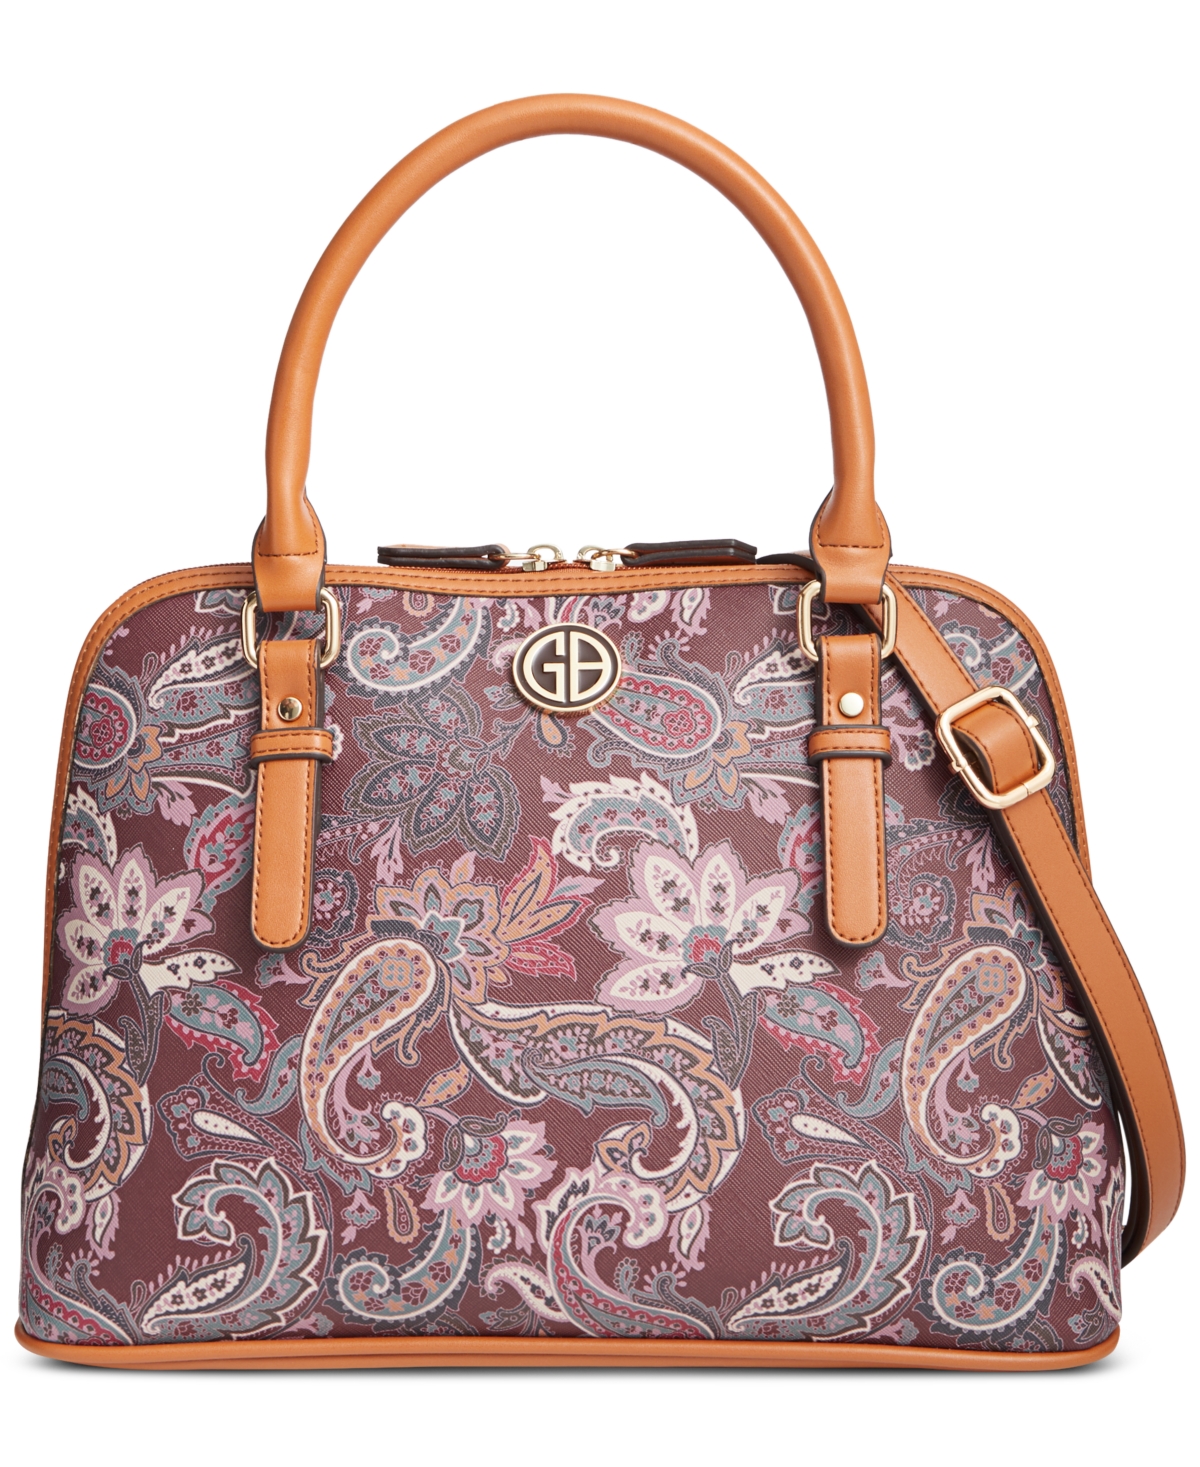 Tapestry Medium Dome Satchel, Created for Macy's - Wine